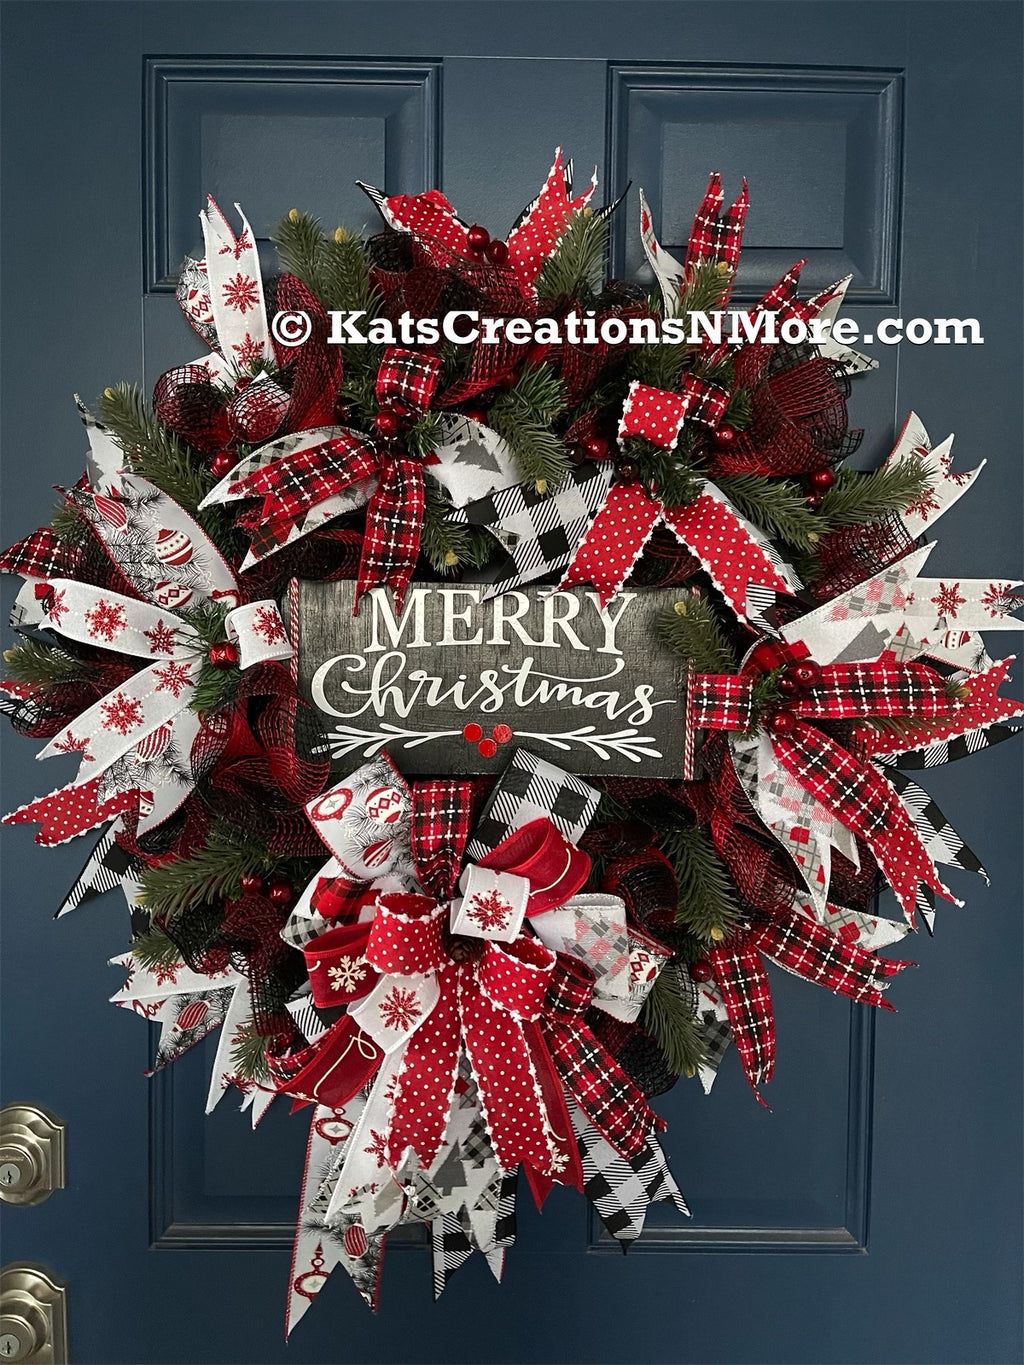 Red, White and Black Evergreen Merry Christmas Wreath with a Bow on a Blue Door